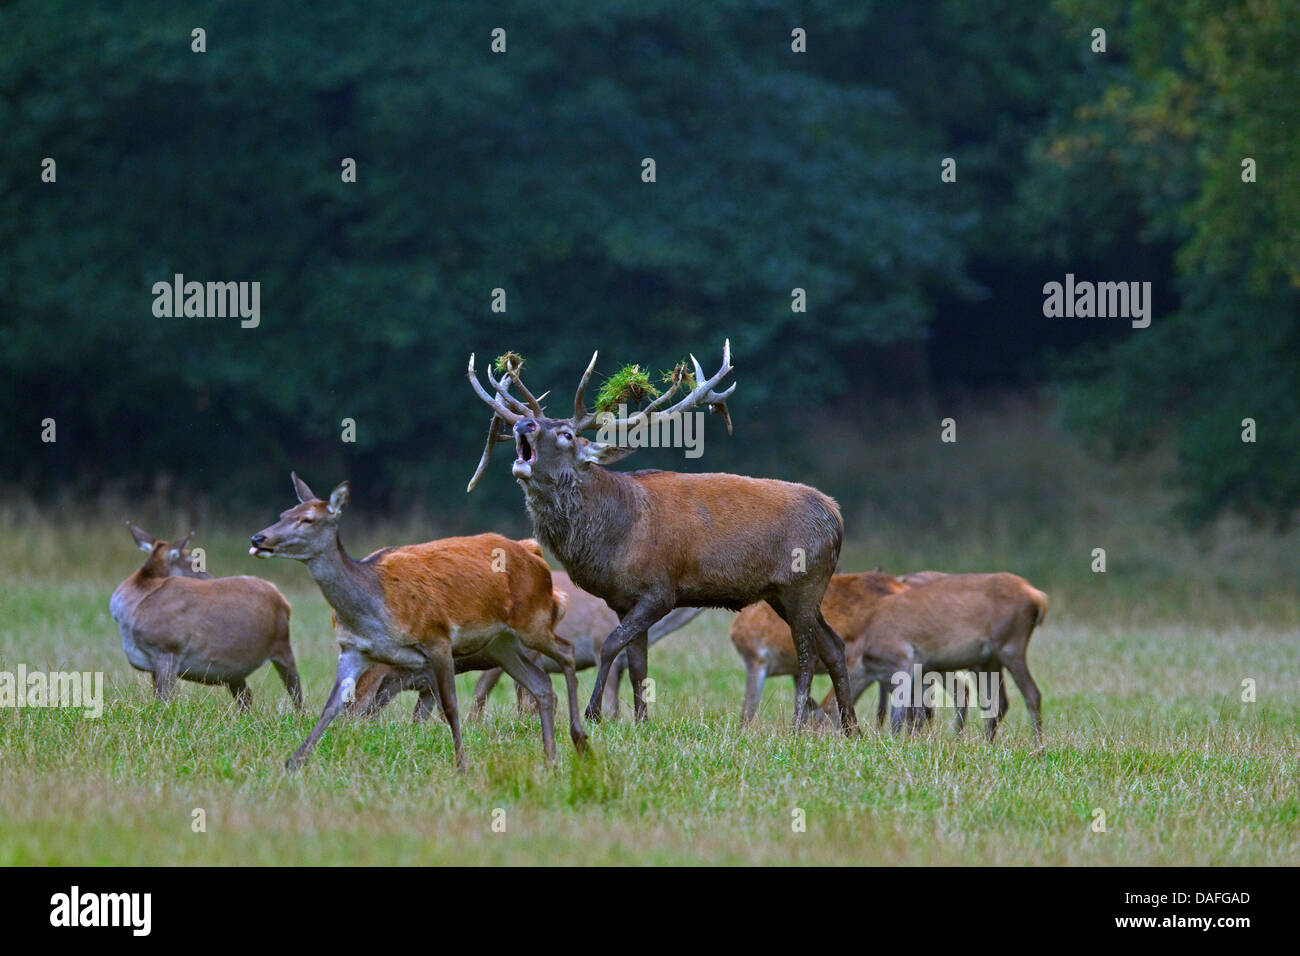 red deer (Cervus elaphus), roaring dominant male standing with his pack at a clearing, Germany, North Rhine-Westphalia, Sauerland Stock Photo